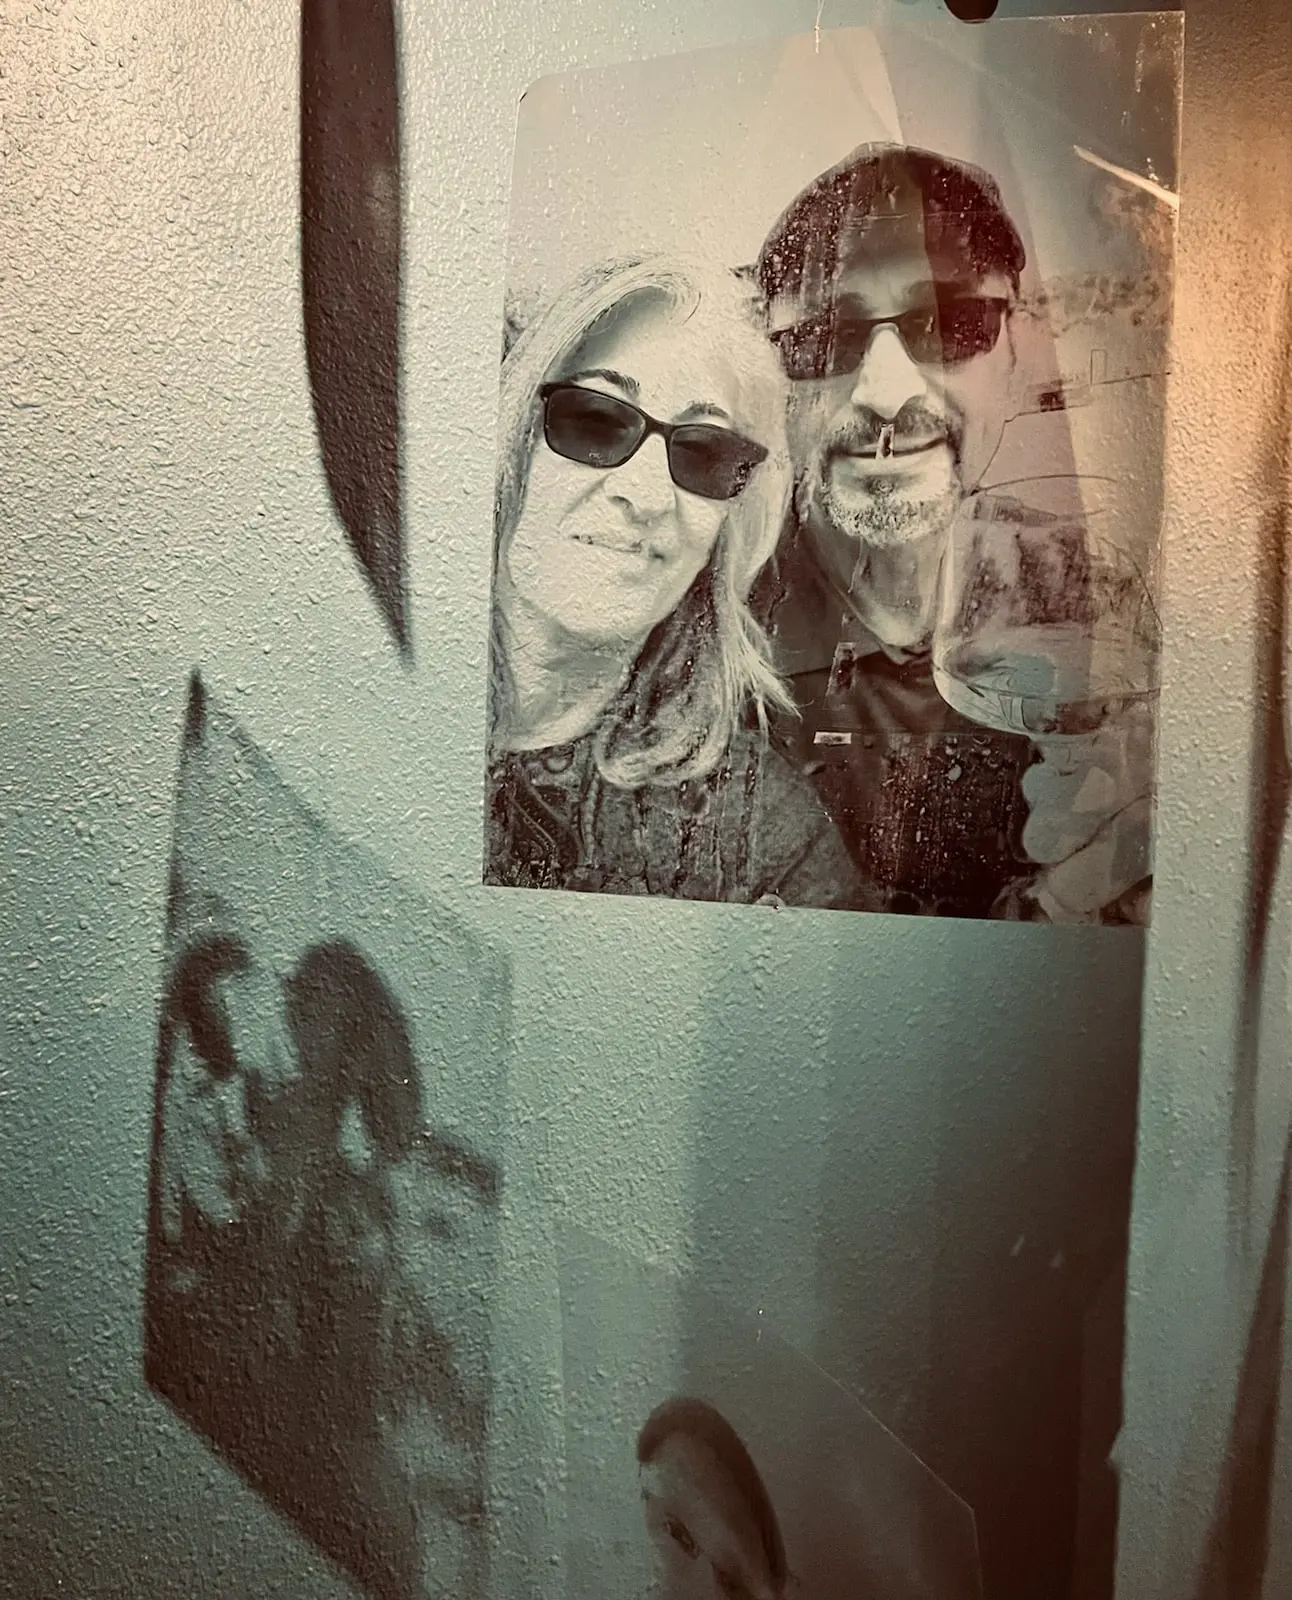 Examples of images from the Fading Family Portraits installation (all part of Preserved Memories). The same image is reproduced and fades, emblematic of Alzheimer’s disease.